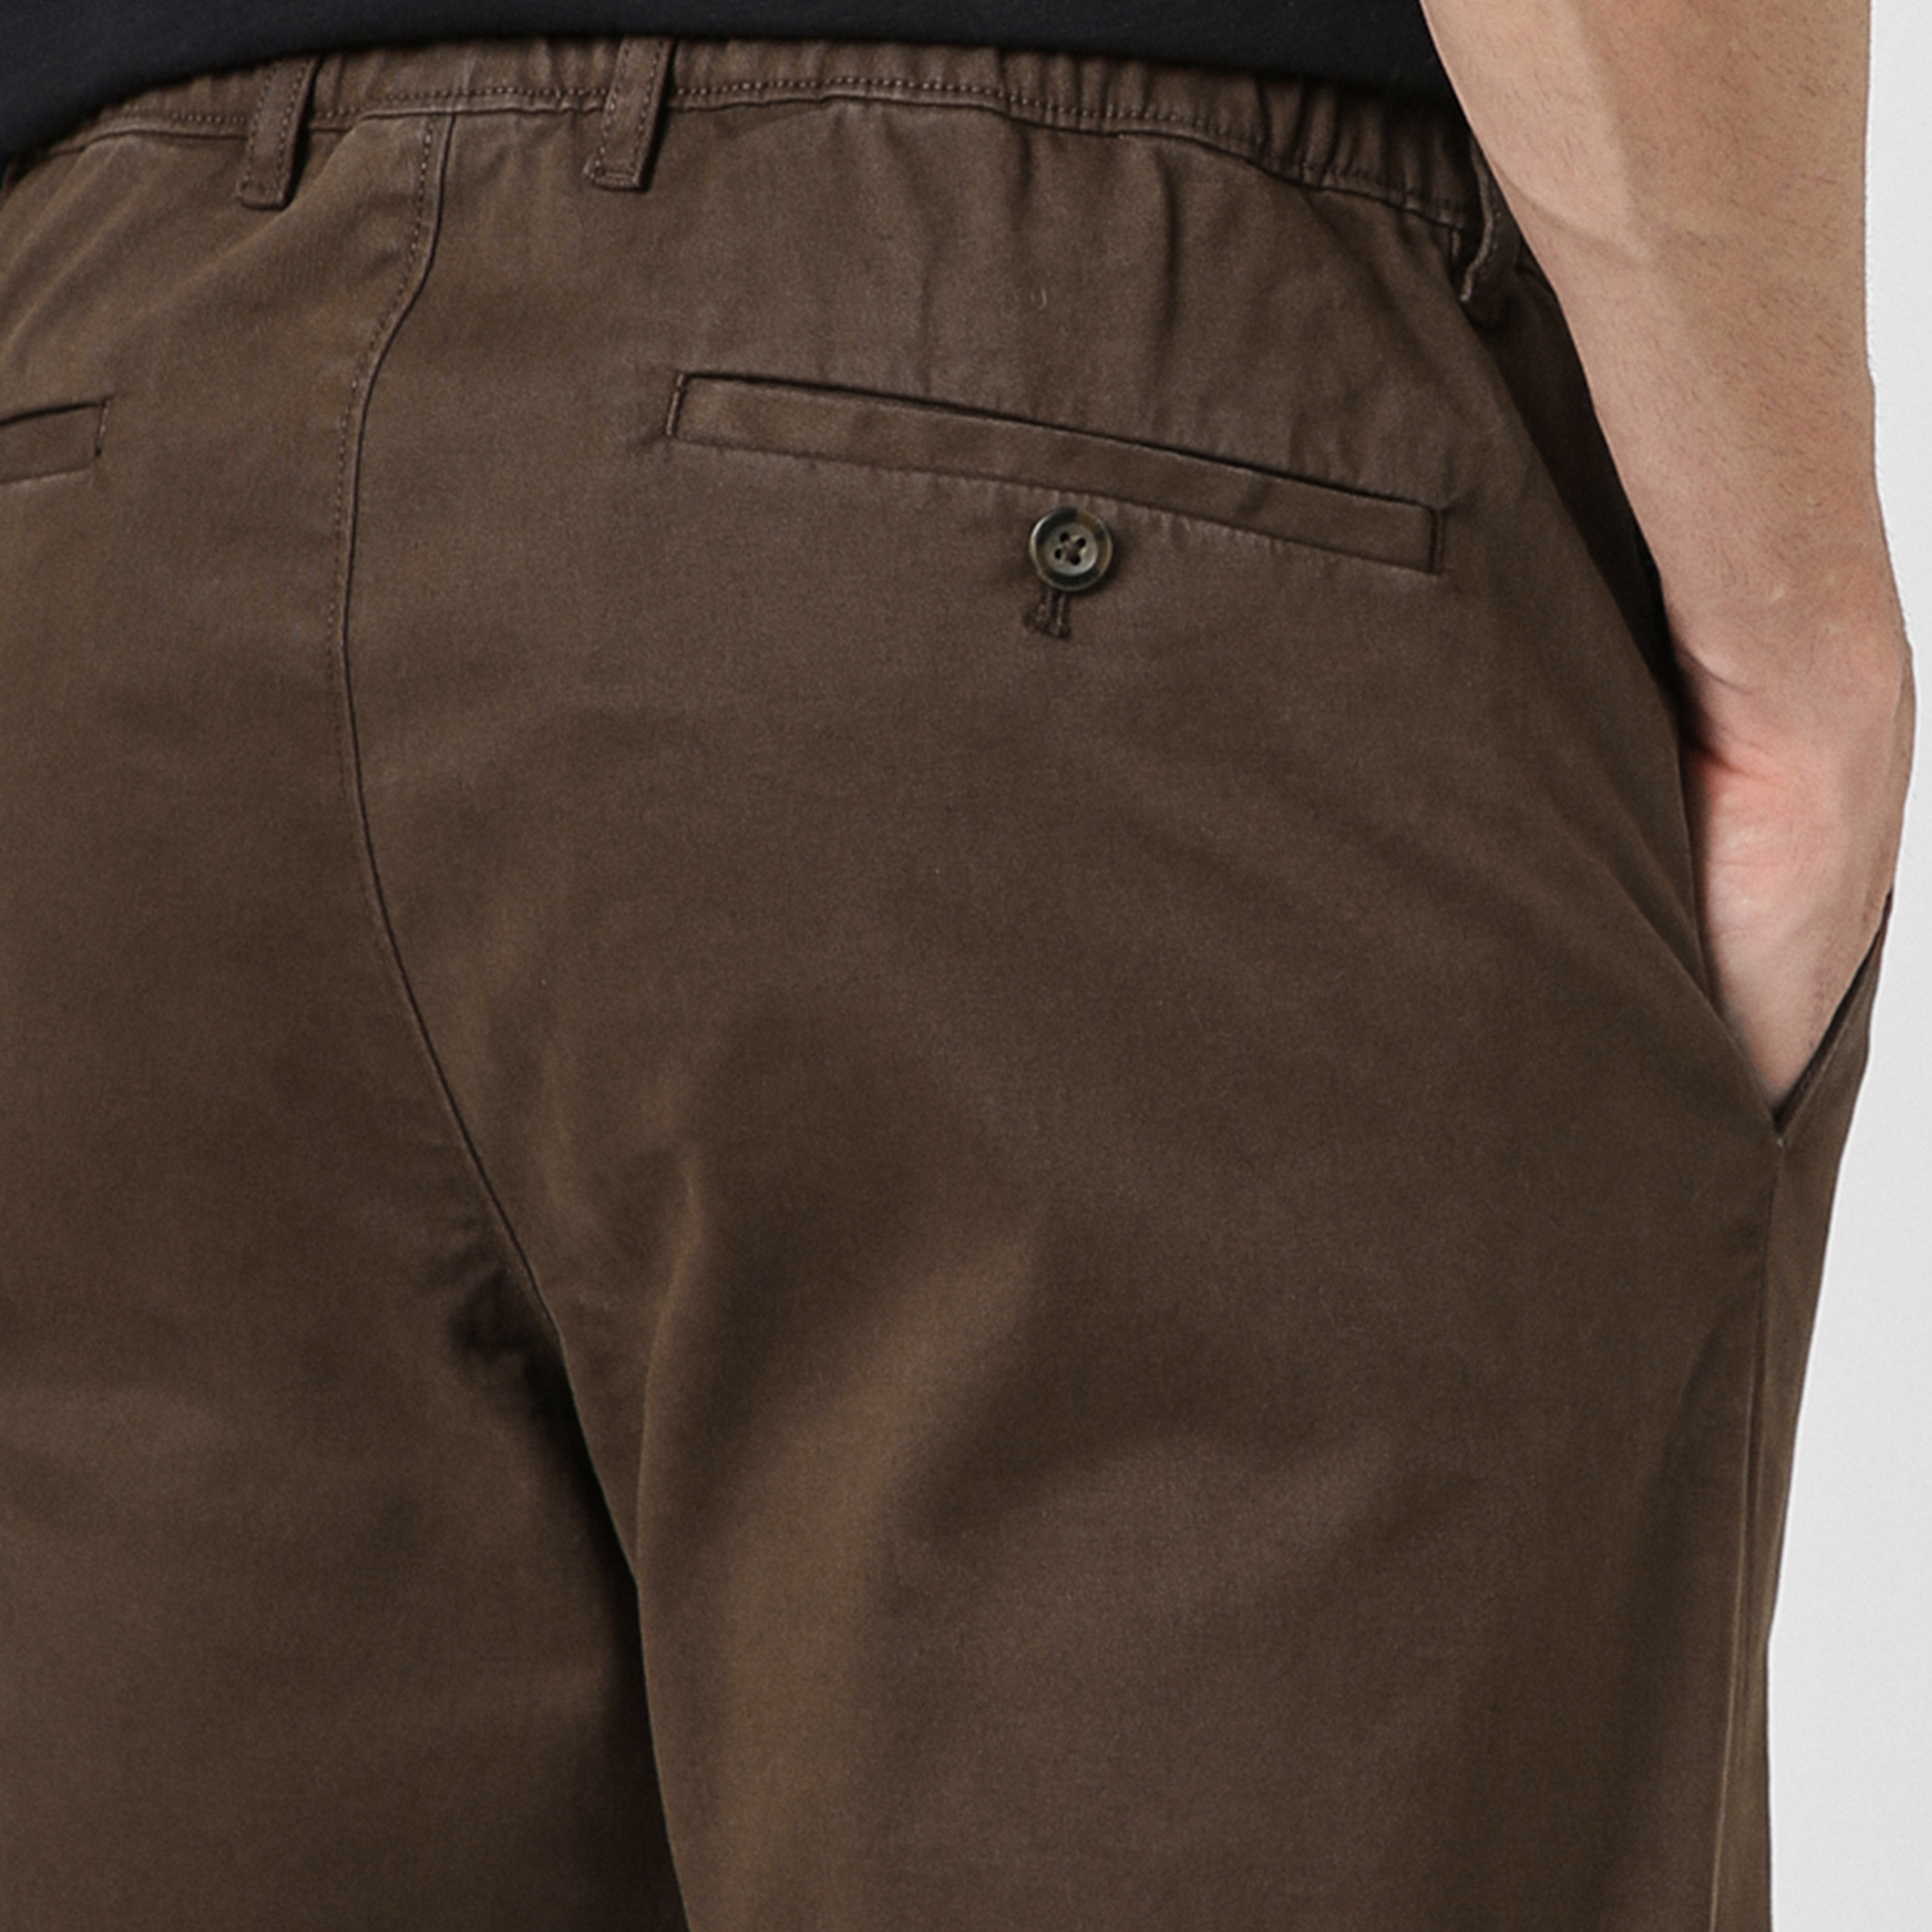 Relaxed Stretch Chino Pant Cocoa close up back right pocket on model